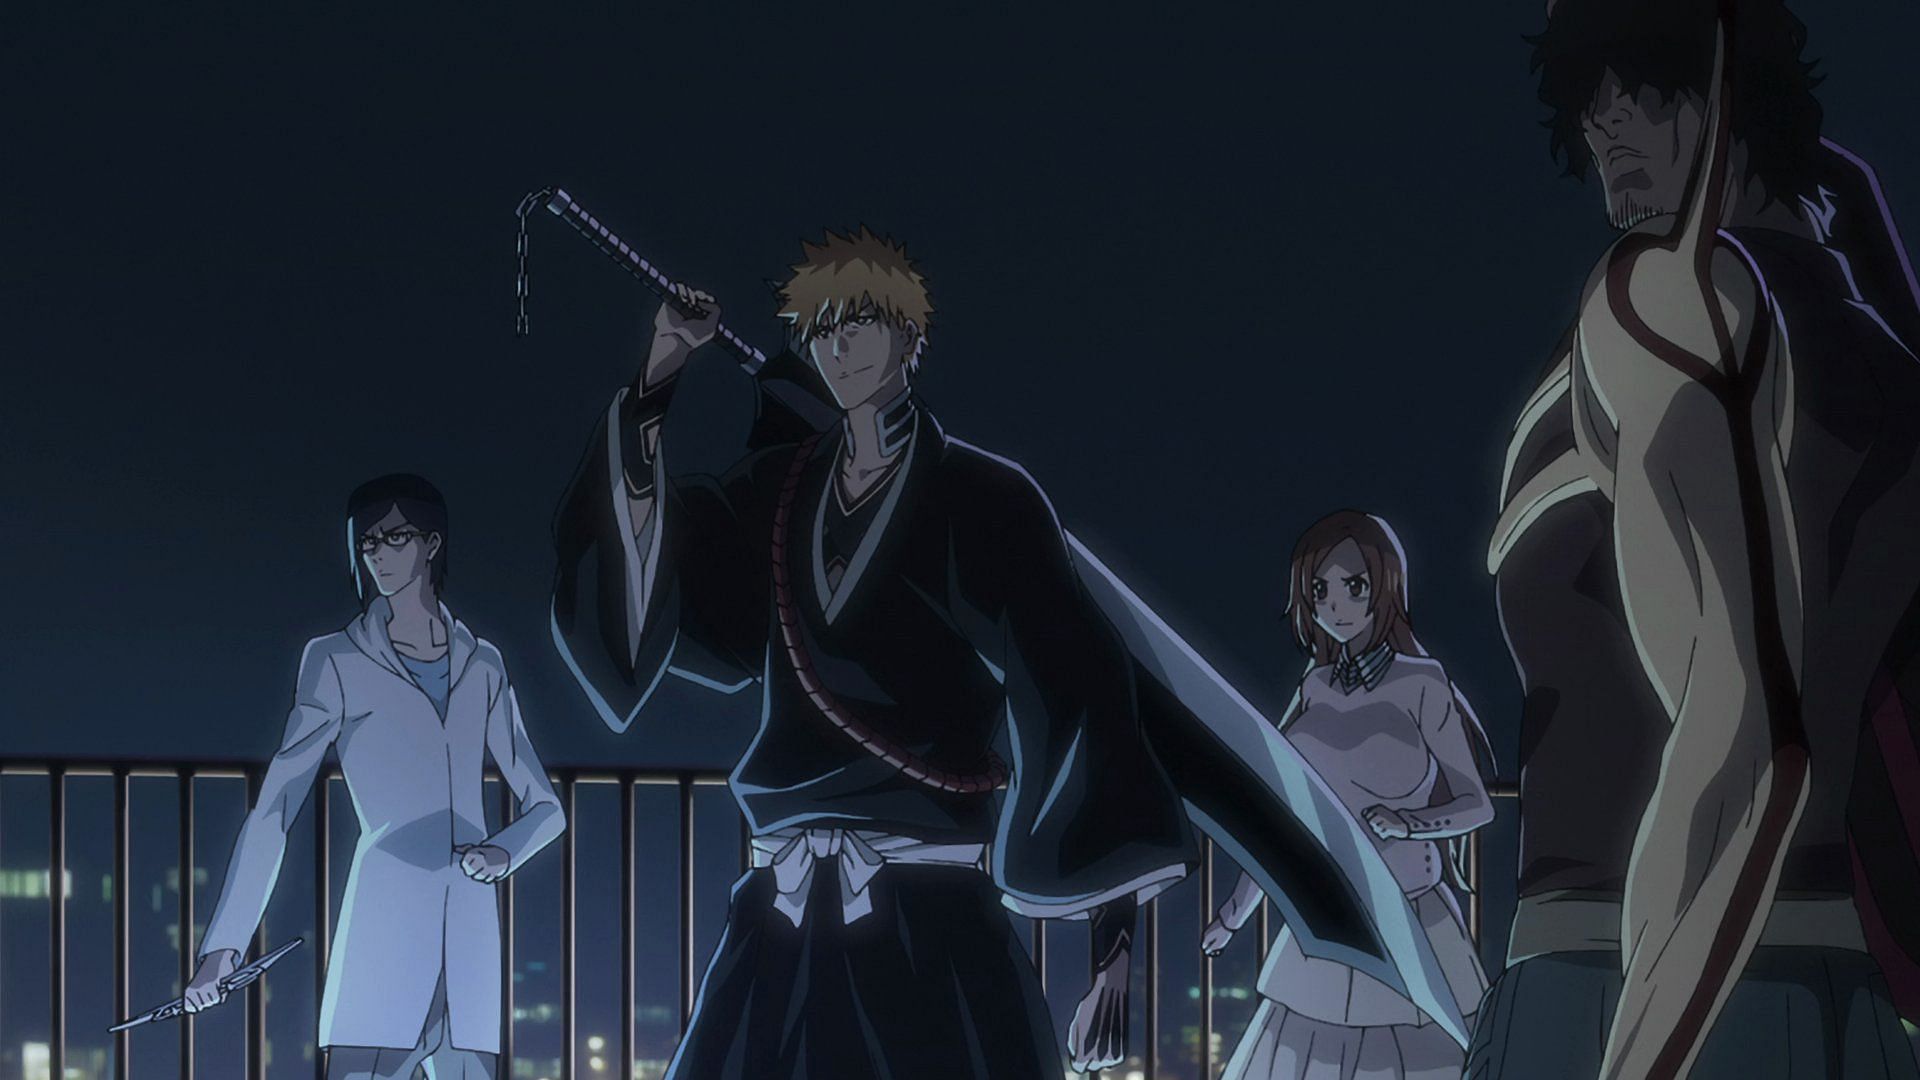 When Will Bleach Bleach's Episode 14: The Thousand-Year Blood War Be Released? Latest Updates and News